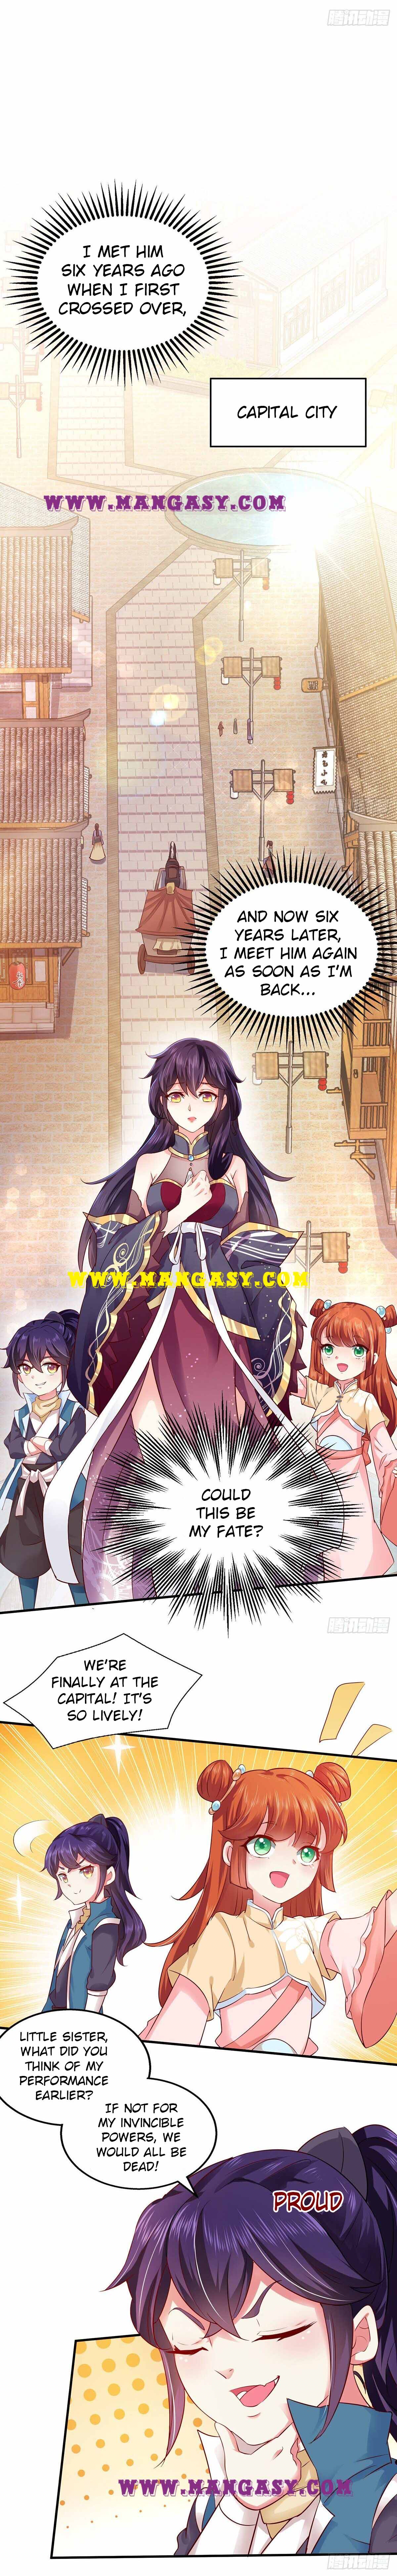 Loved By A Devilish Ruler - Chapter 11-Scapegoat - Manga SY